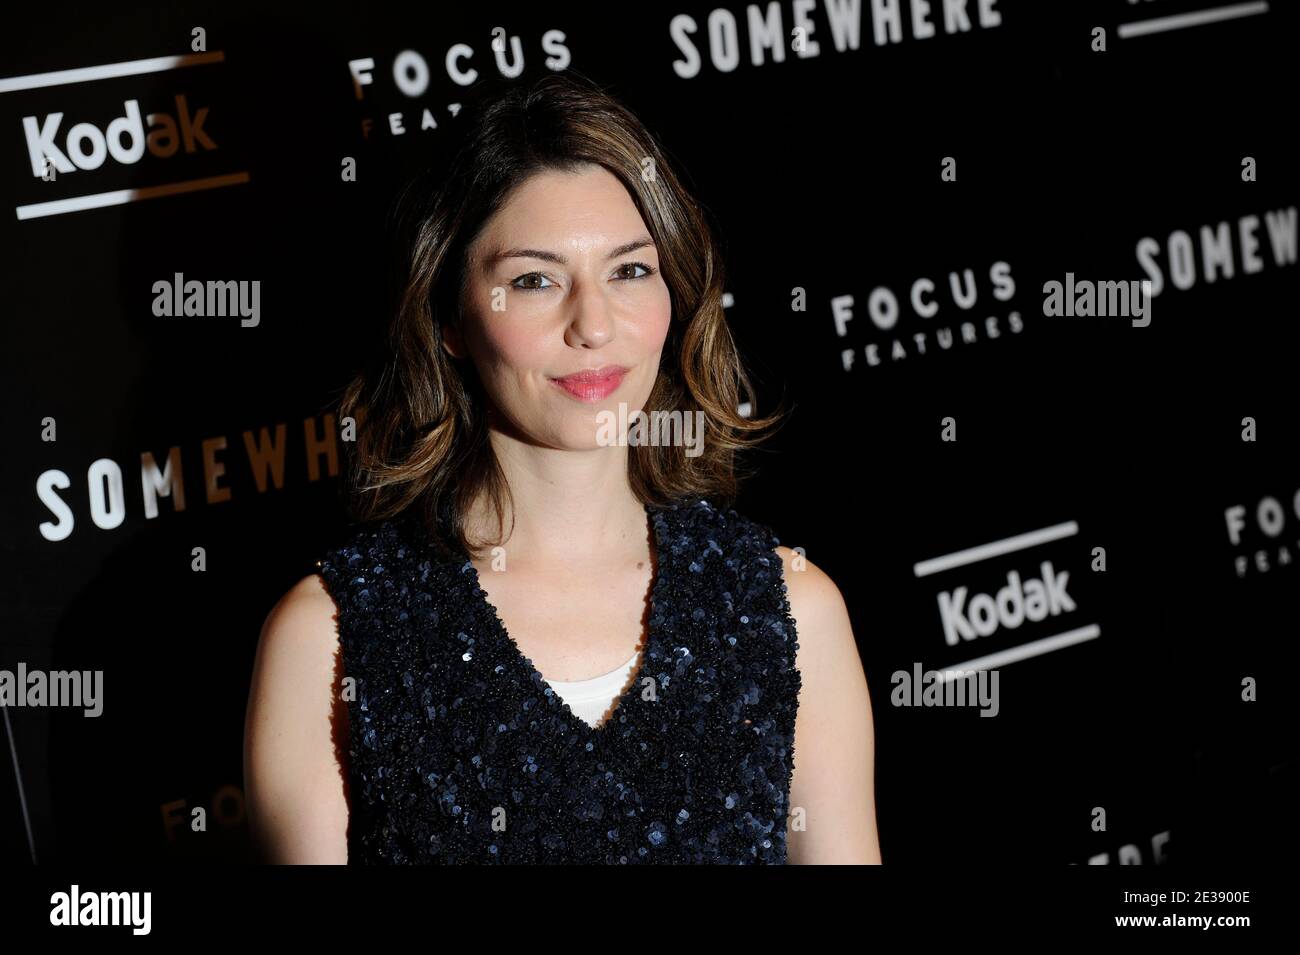 Sofia Coppola arriving for the premiere of 'Somewhere' at the Tribeca Grand Hotel in New York City, NY, USA on December 12, 2010. Photo by Mehdi Taamallah/ABACAPRESS.COM Stock Photo